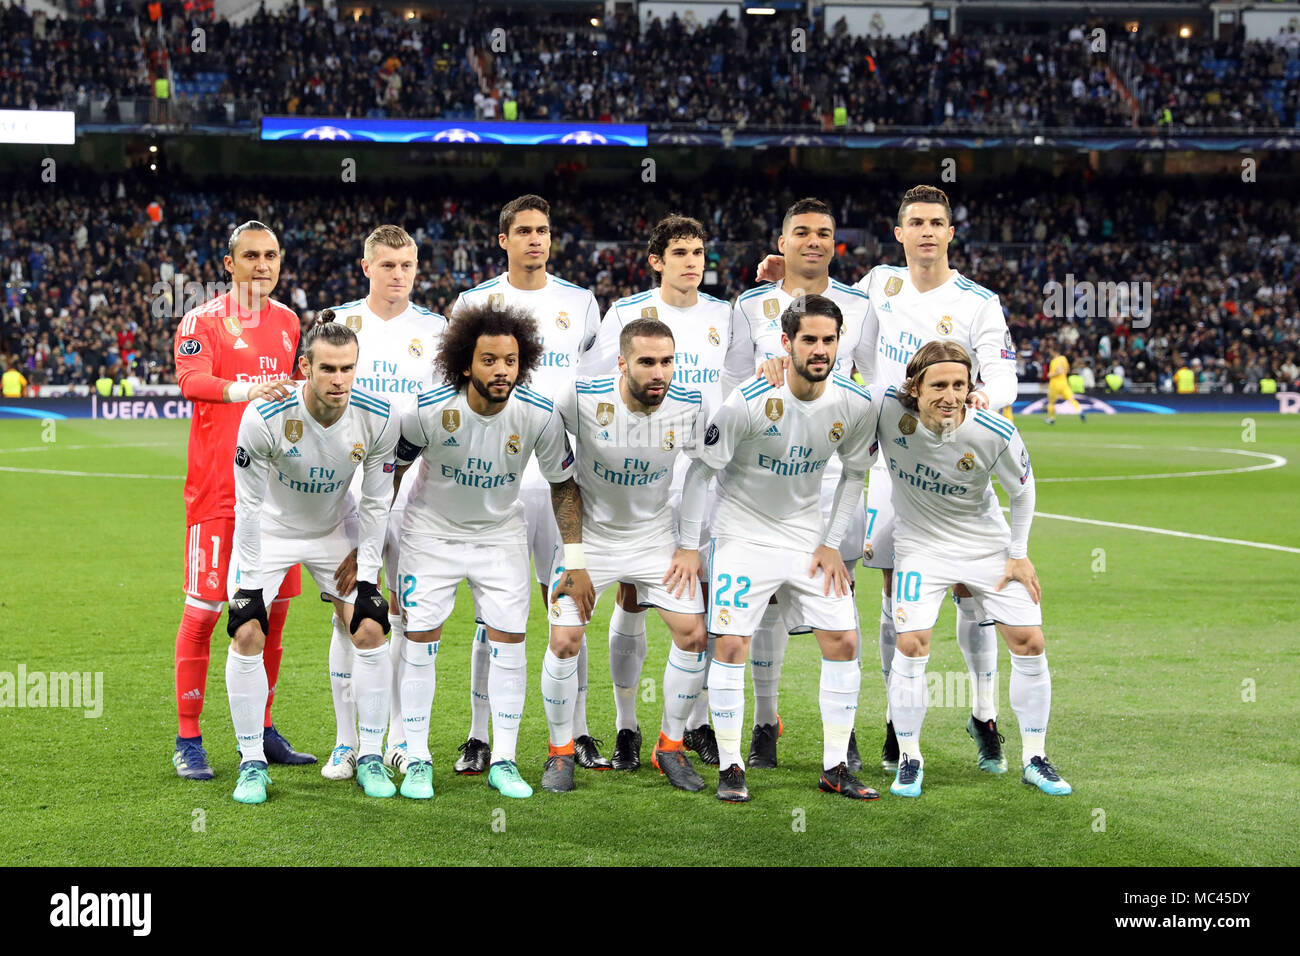 Players of Real Madrid pose before the UEFA Champions League Group